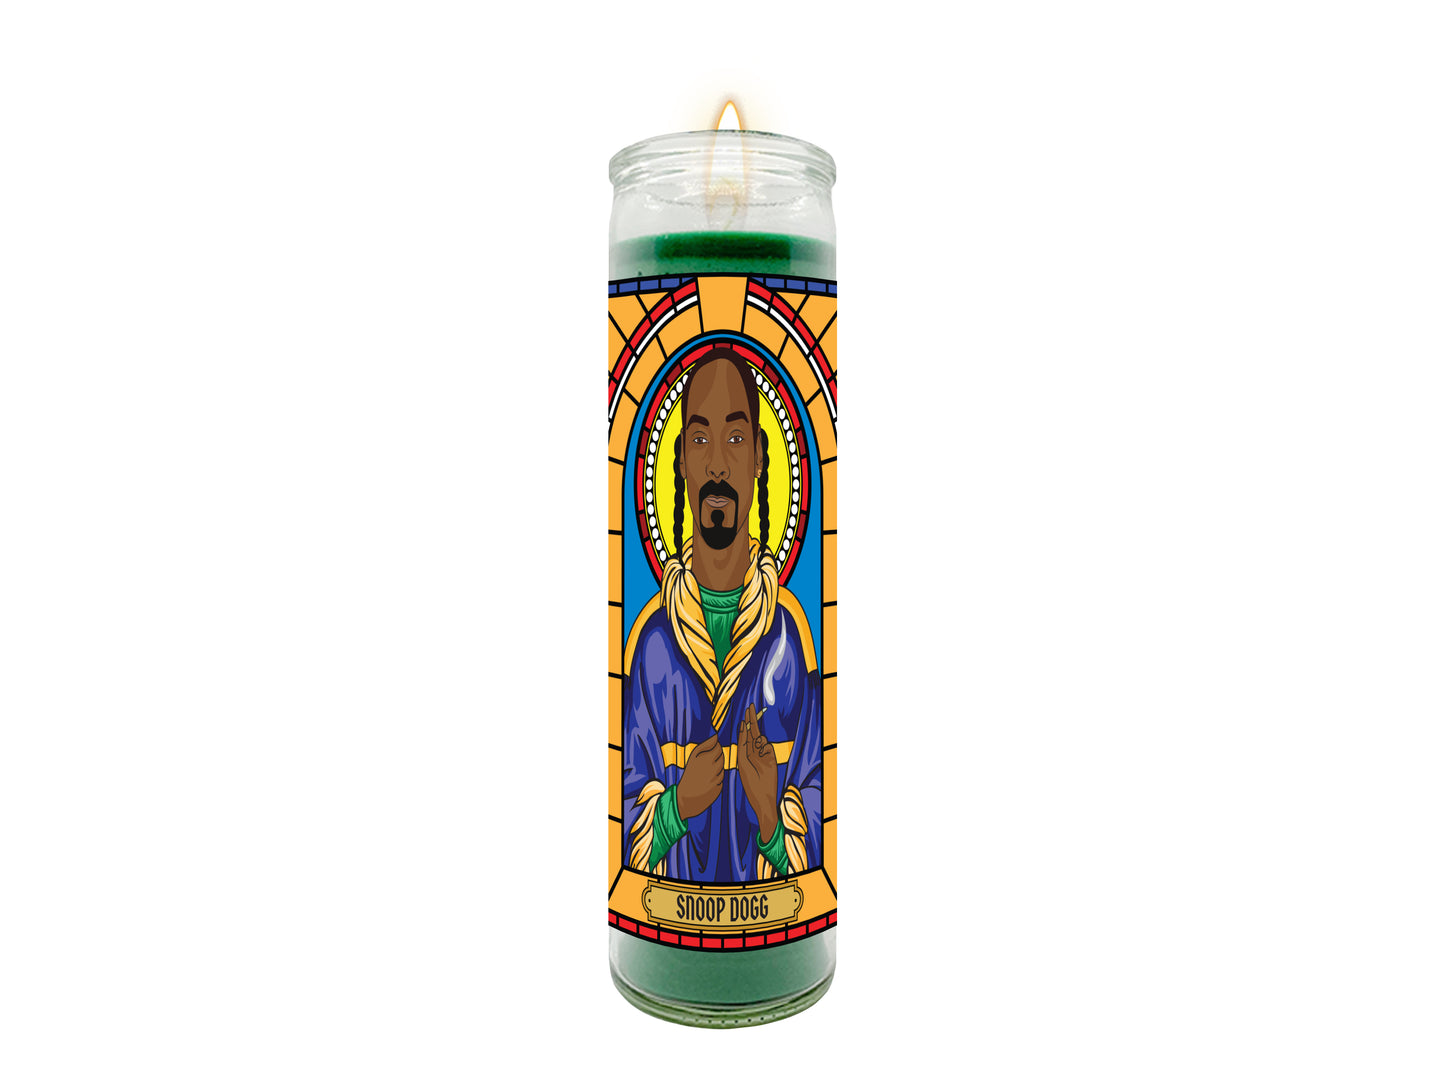 Snoop Dogg Illustrated Prayer Candle